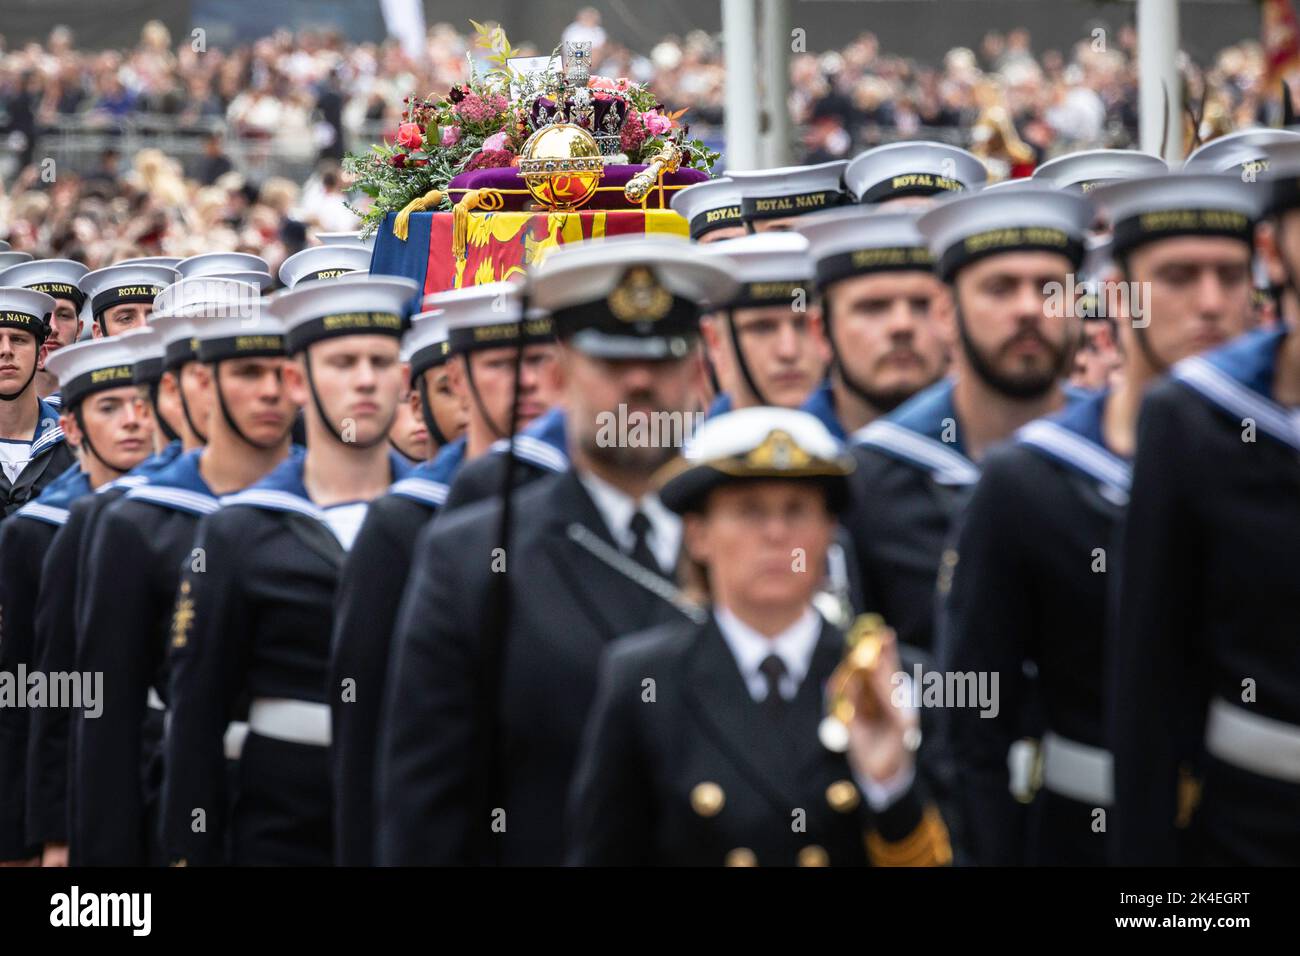 The coffin of Queen Elizabeth II is carried in her funeral procession through London, 22 September 2022, England, United Kingdom Stock Photo